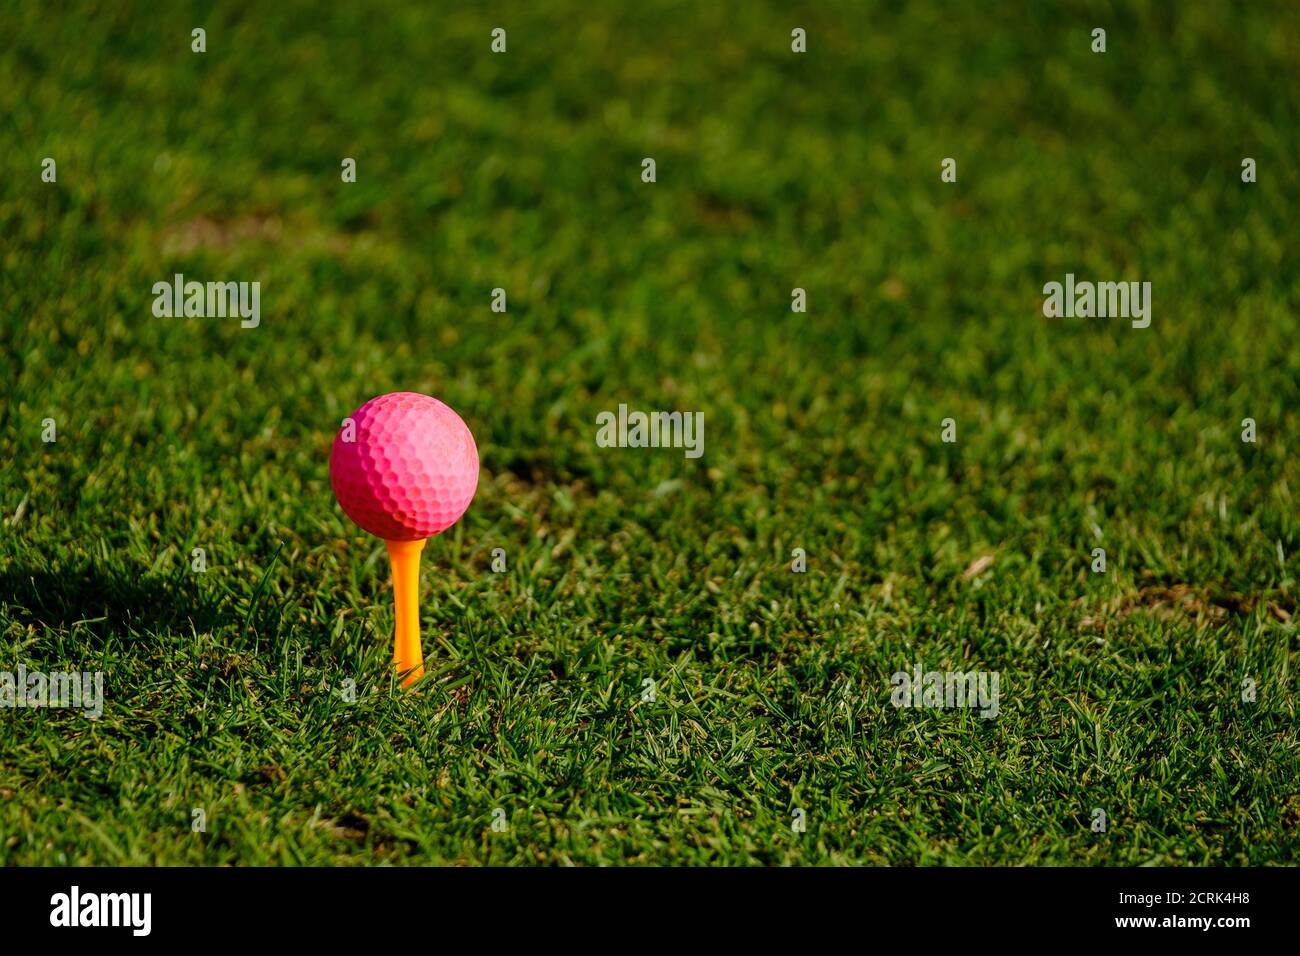 Close-up of pink golf ball on yellow tee on grass golf course Stock Photo